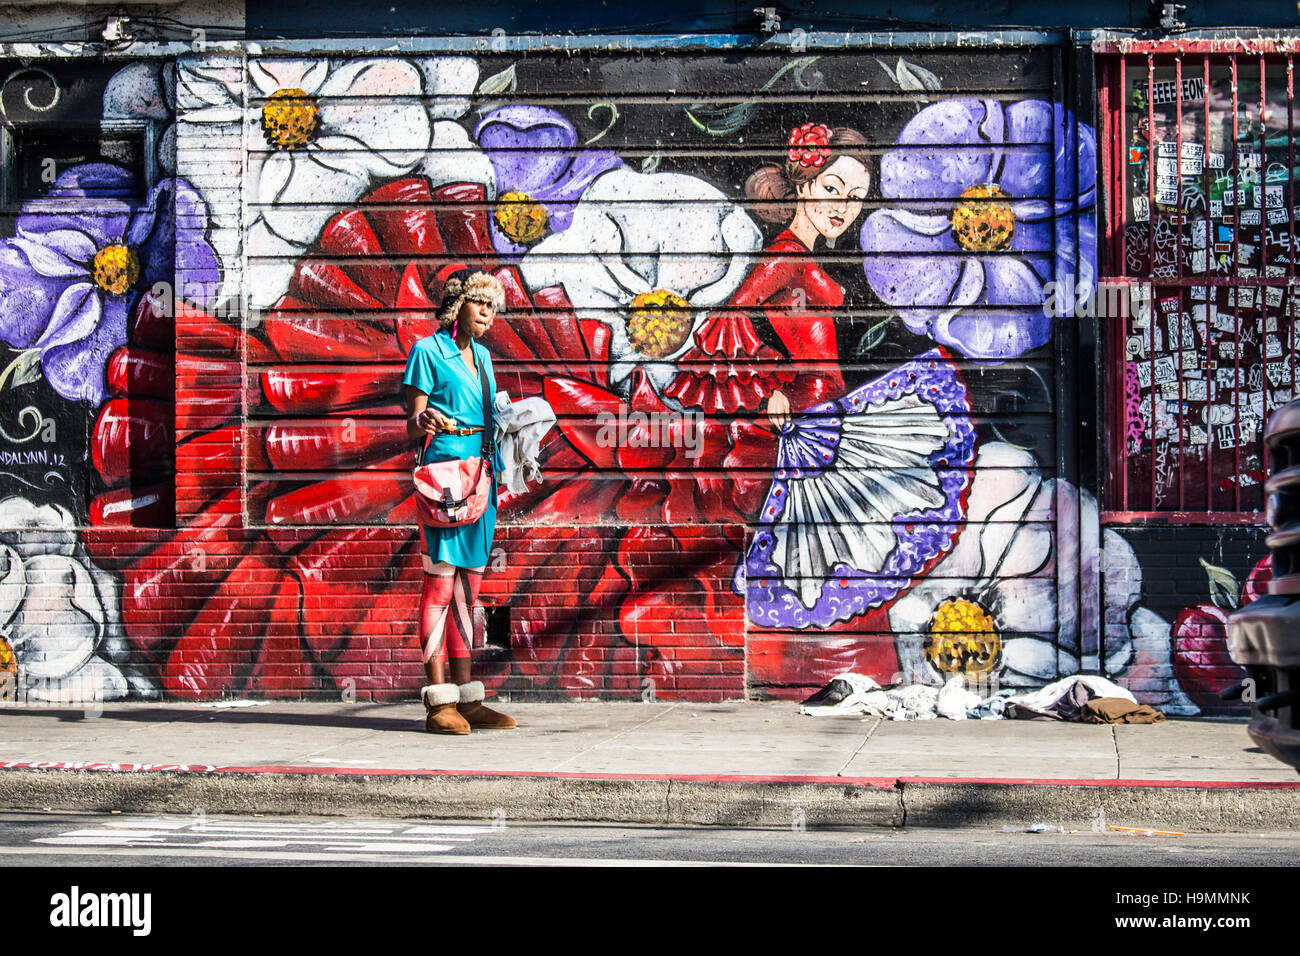 Homeless woman in front of street art in the Mission, San Francisco, CA Stock Photo